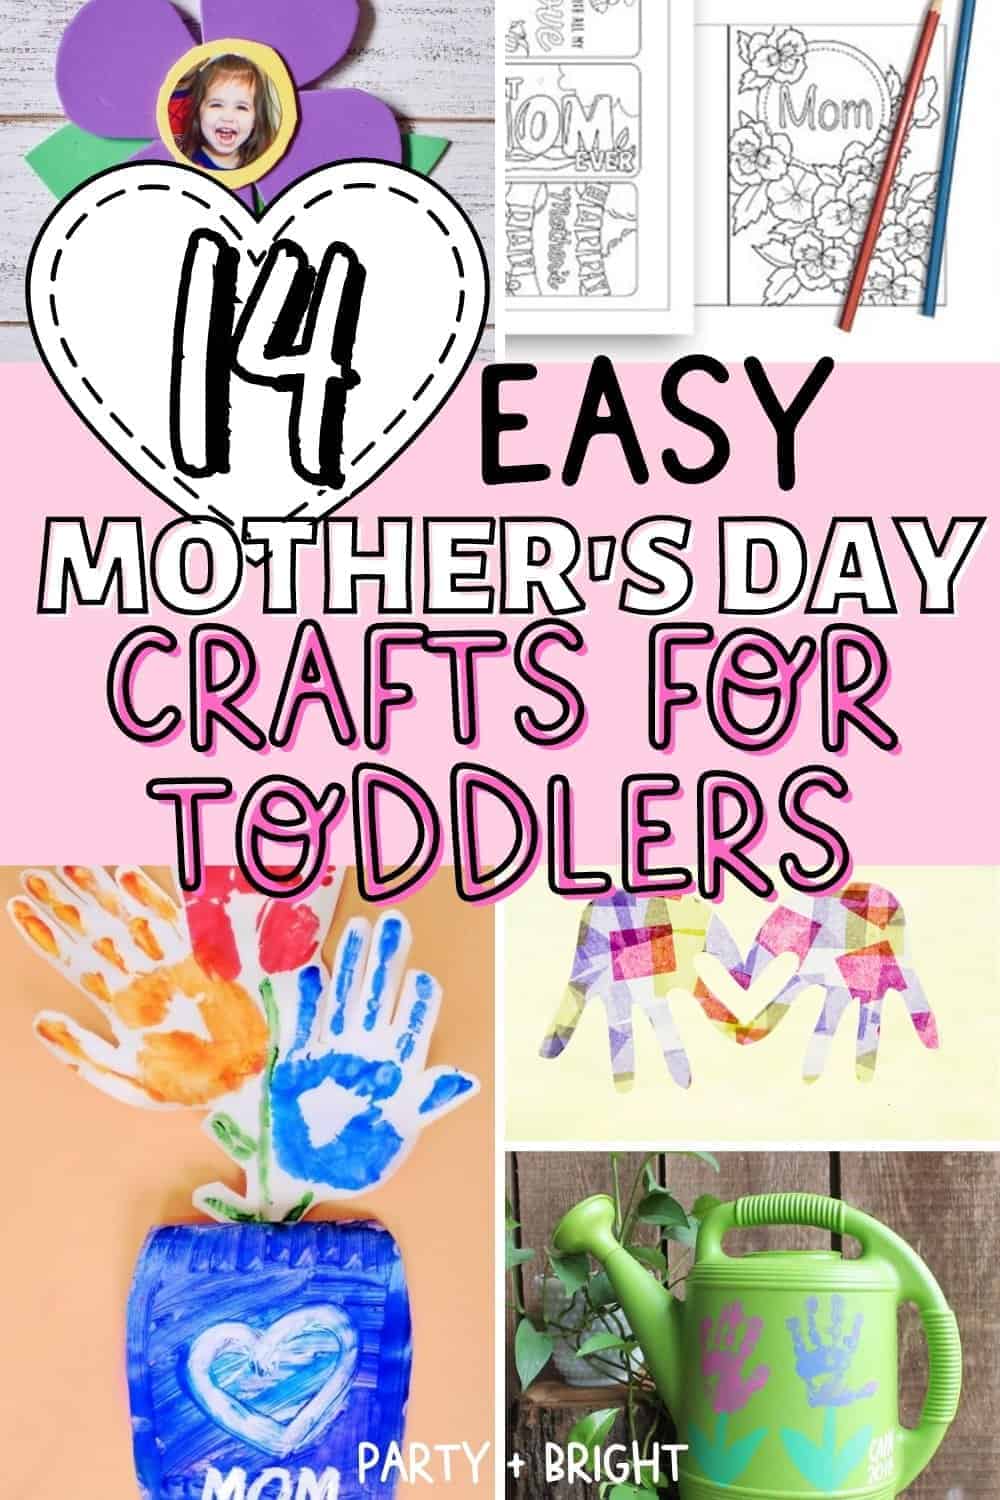 17 Easy Mother’s Day Crafts for Toddlers (DIY Gifts for Mom)